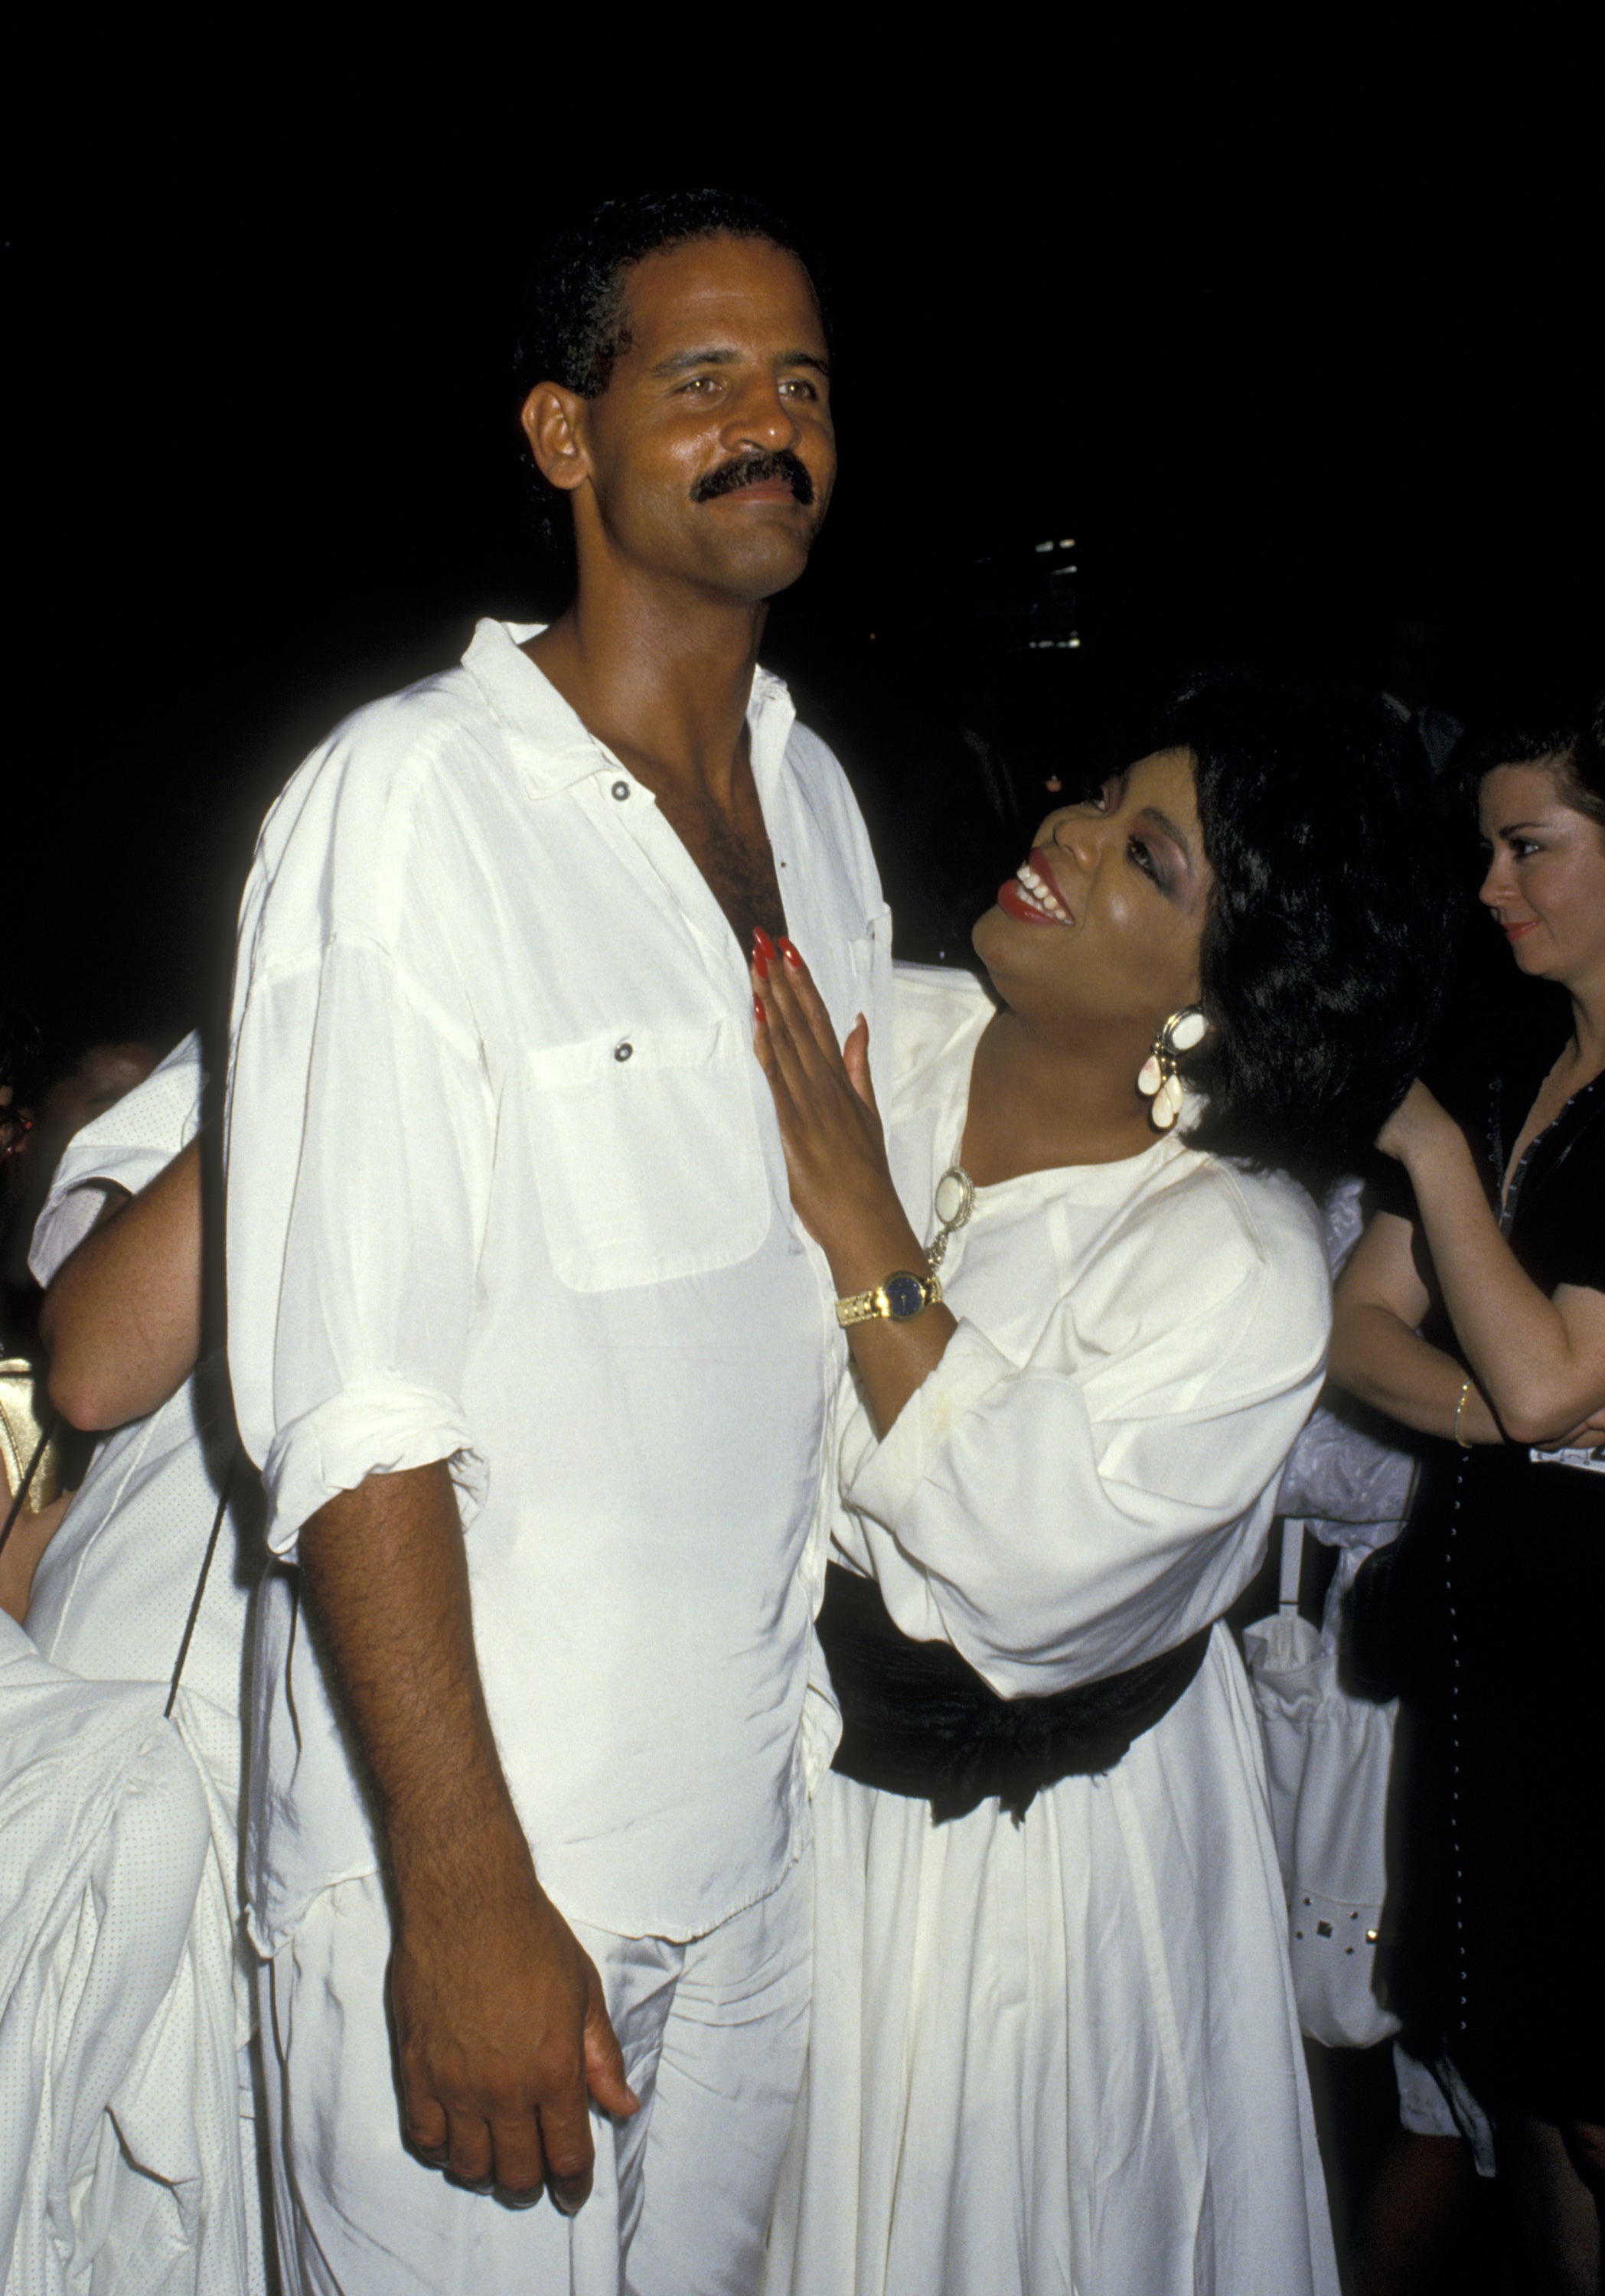 22 Iconic Photos Of Oprah And Stedman's Love Through The Years
